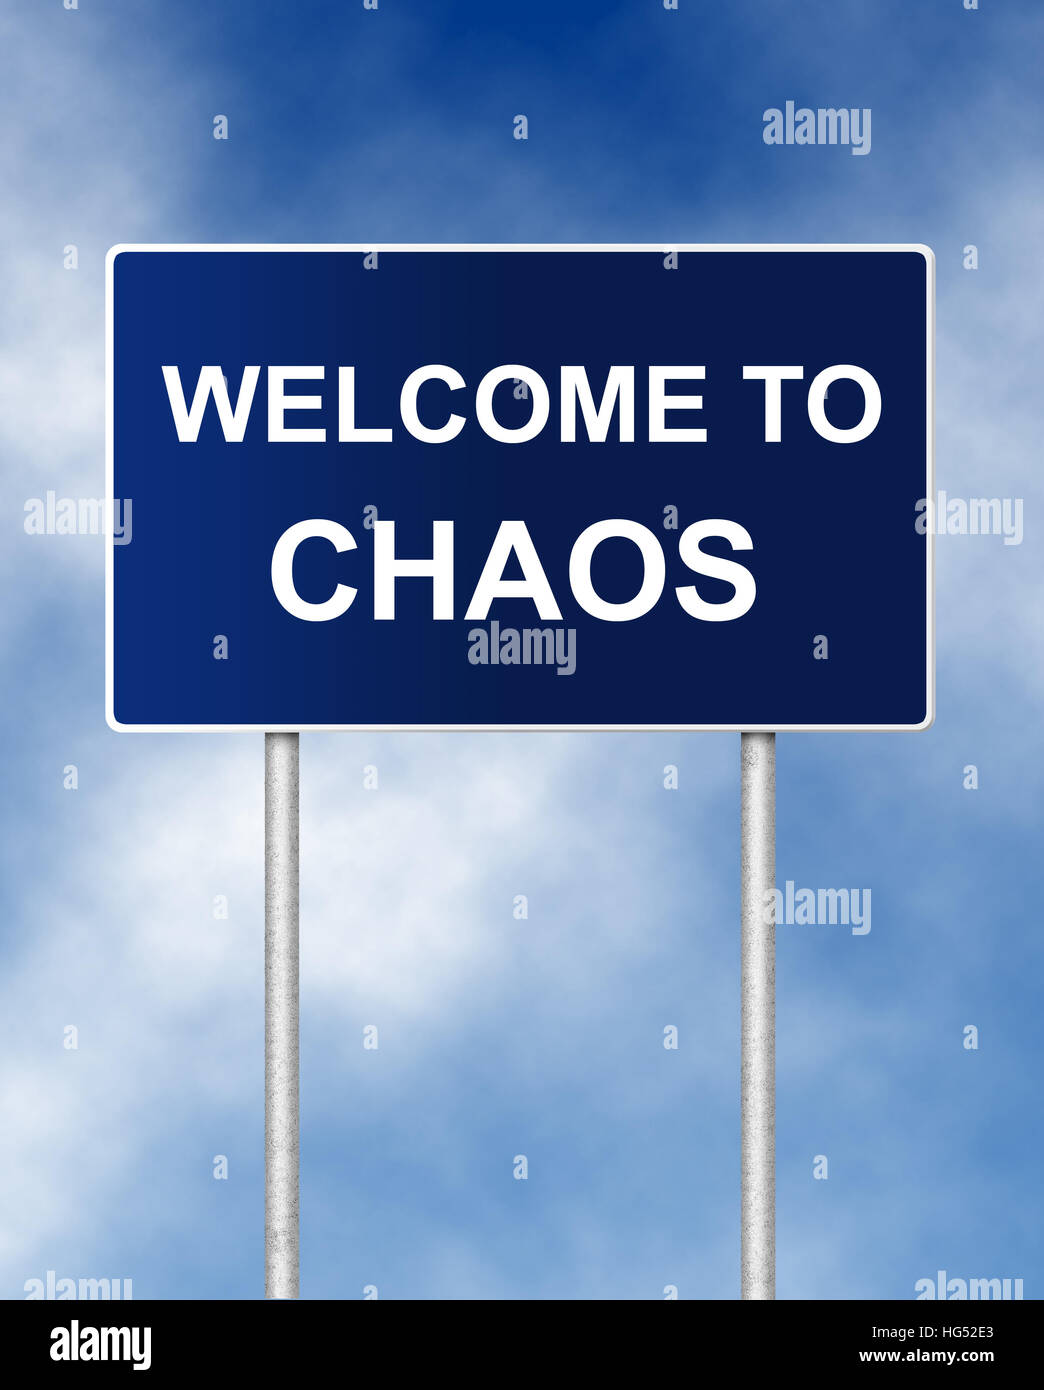 The road sign symbol with text Welcome to chaos Stock Photo